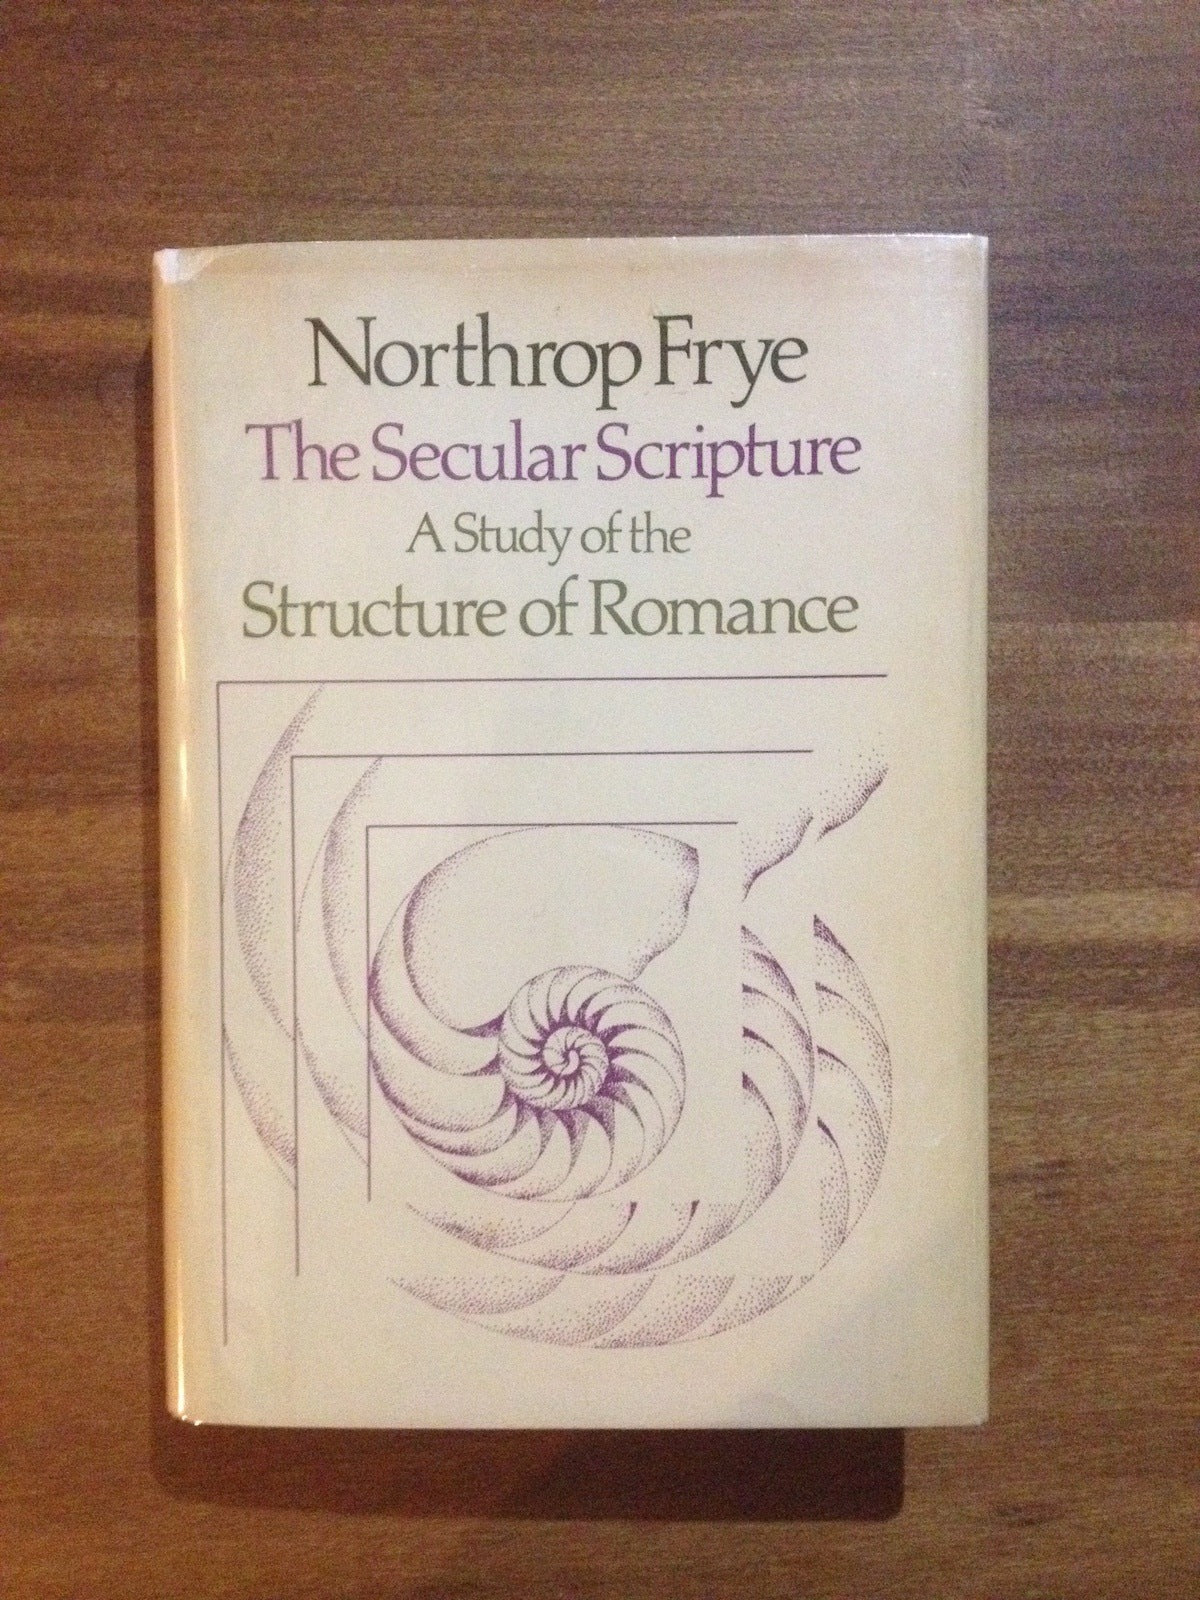 THE SECULAR SCRIPTURE - A STUDY OF ROMANCE BY: NORTHROP FRYE BooksCardsNBikes